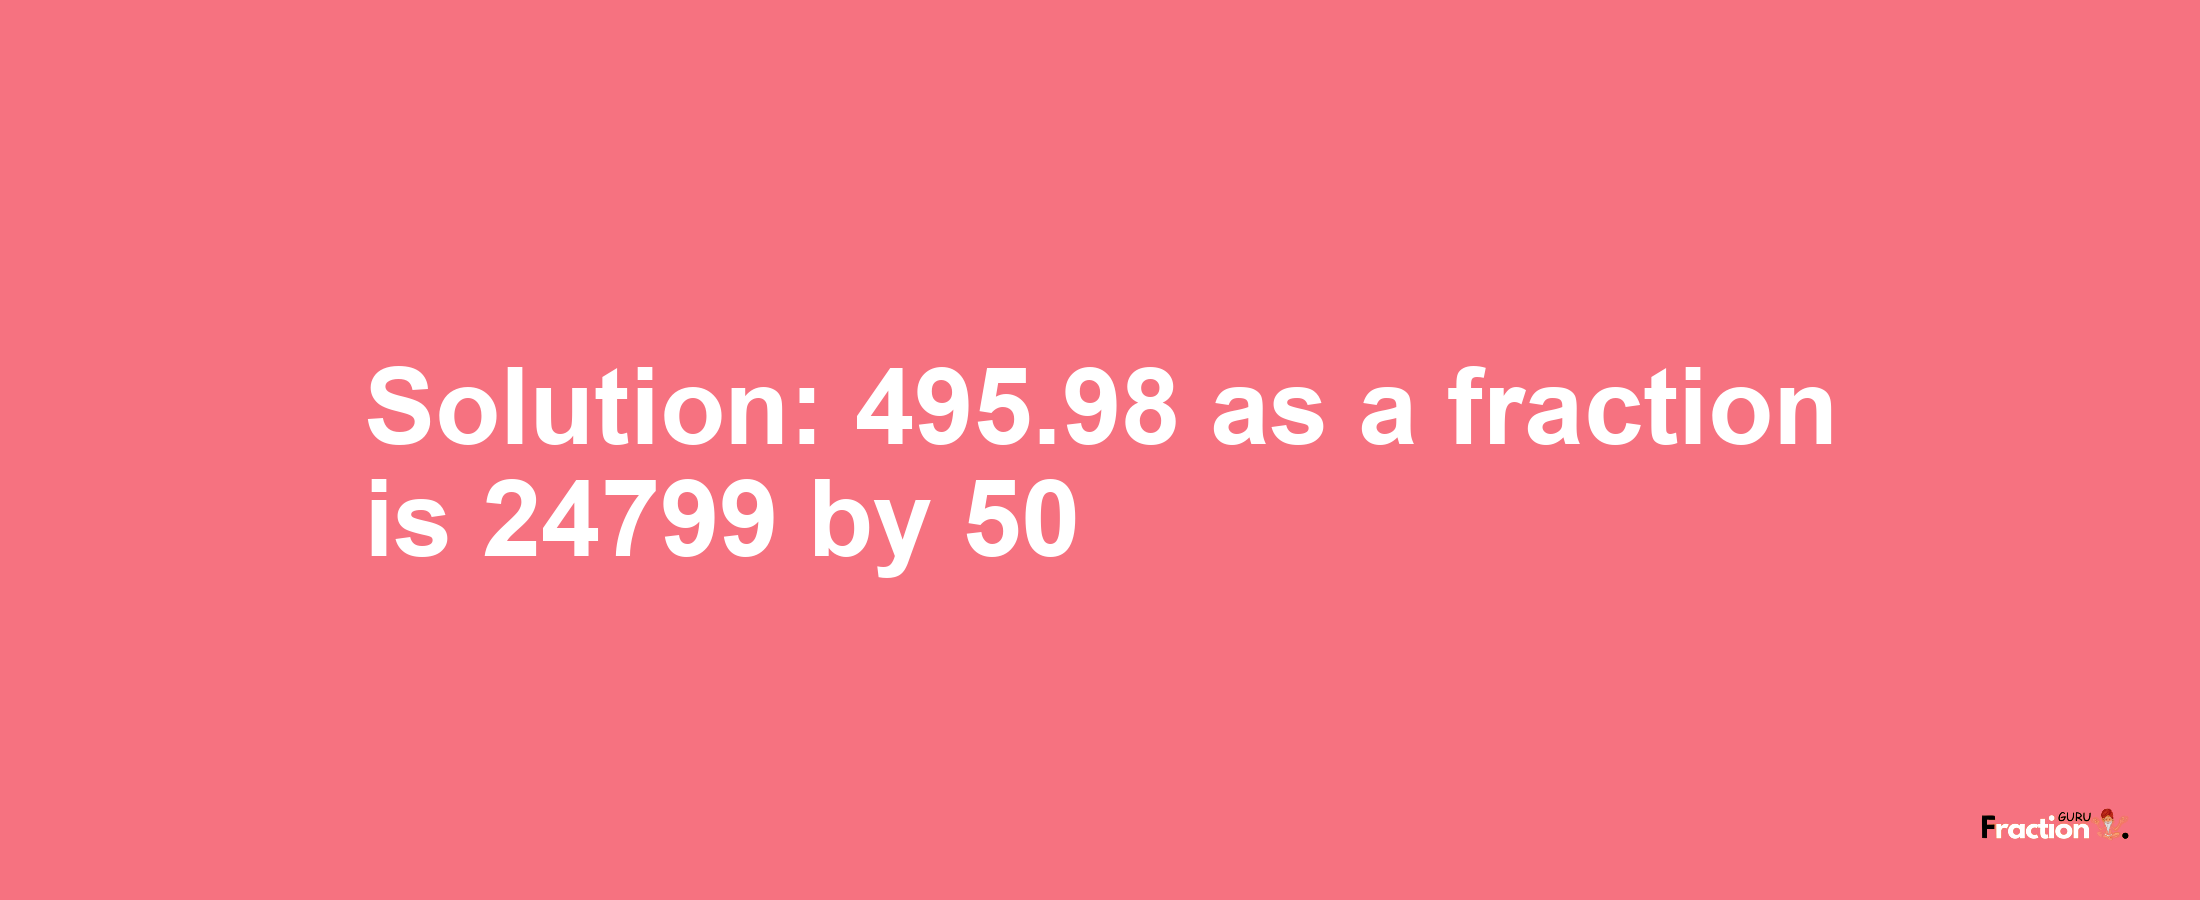 Solution:495.98 as a fraction is 24799/50